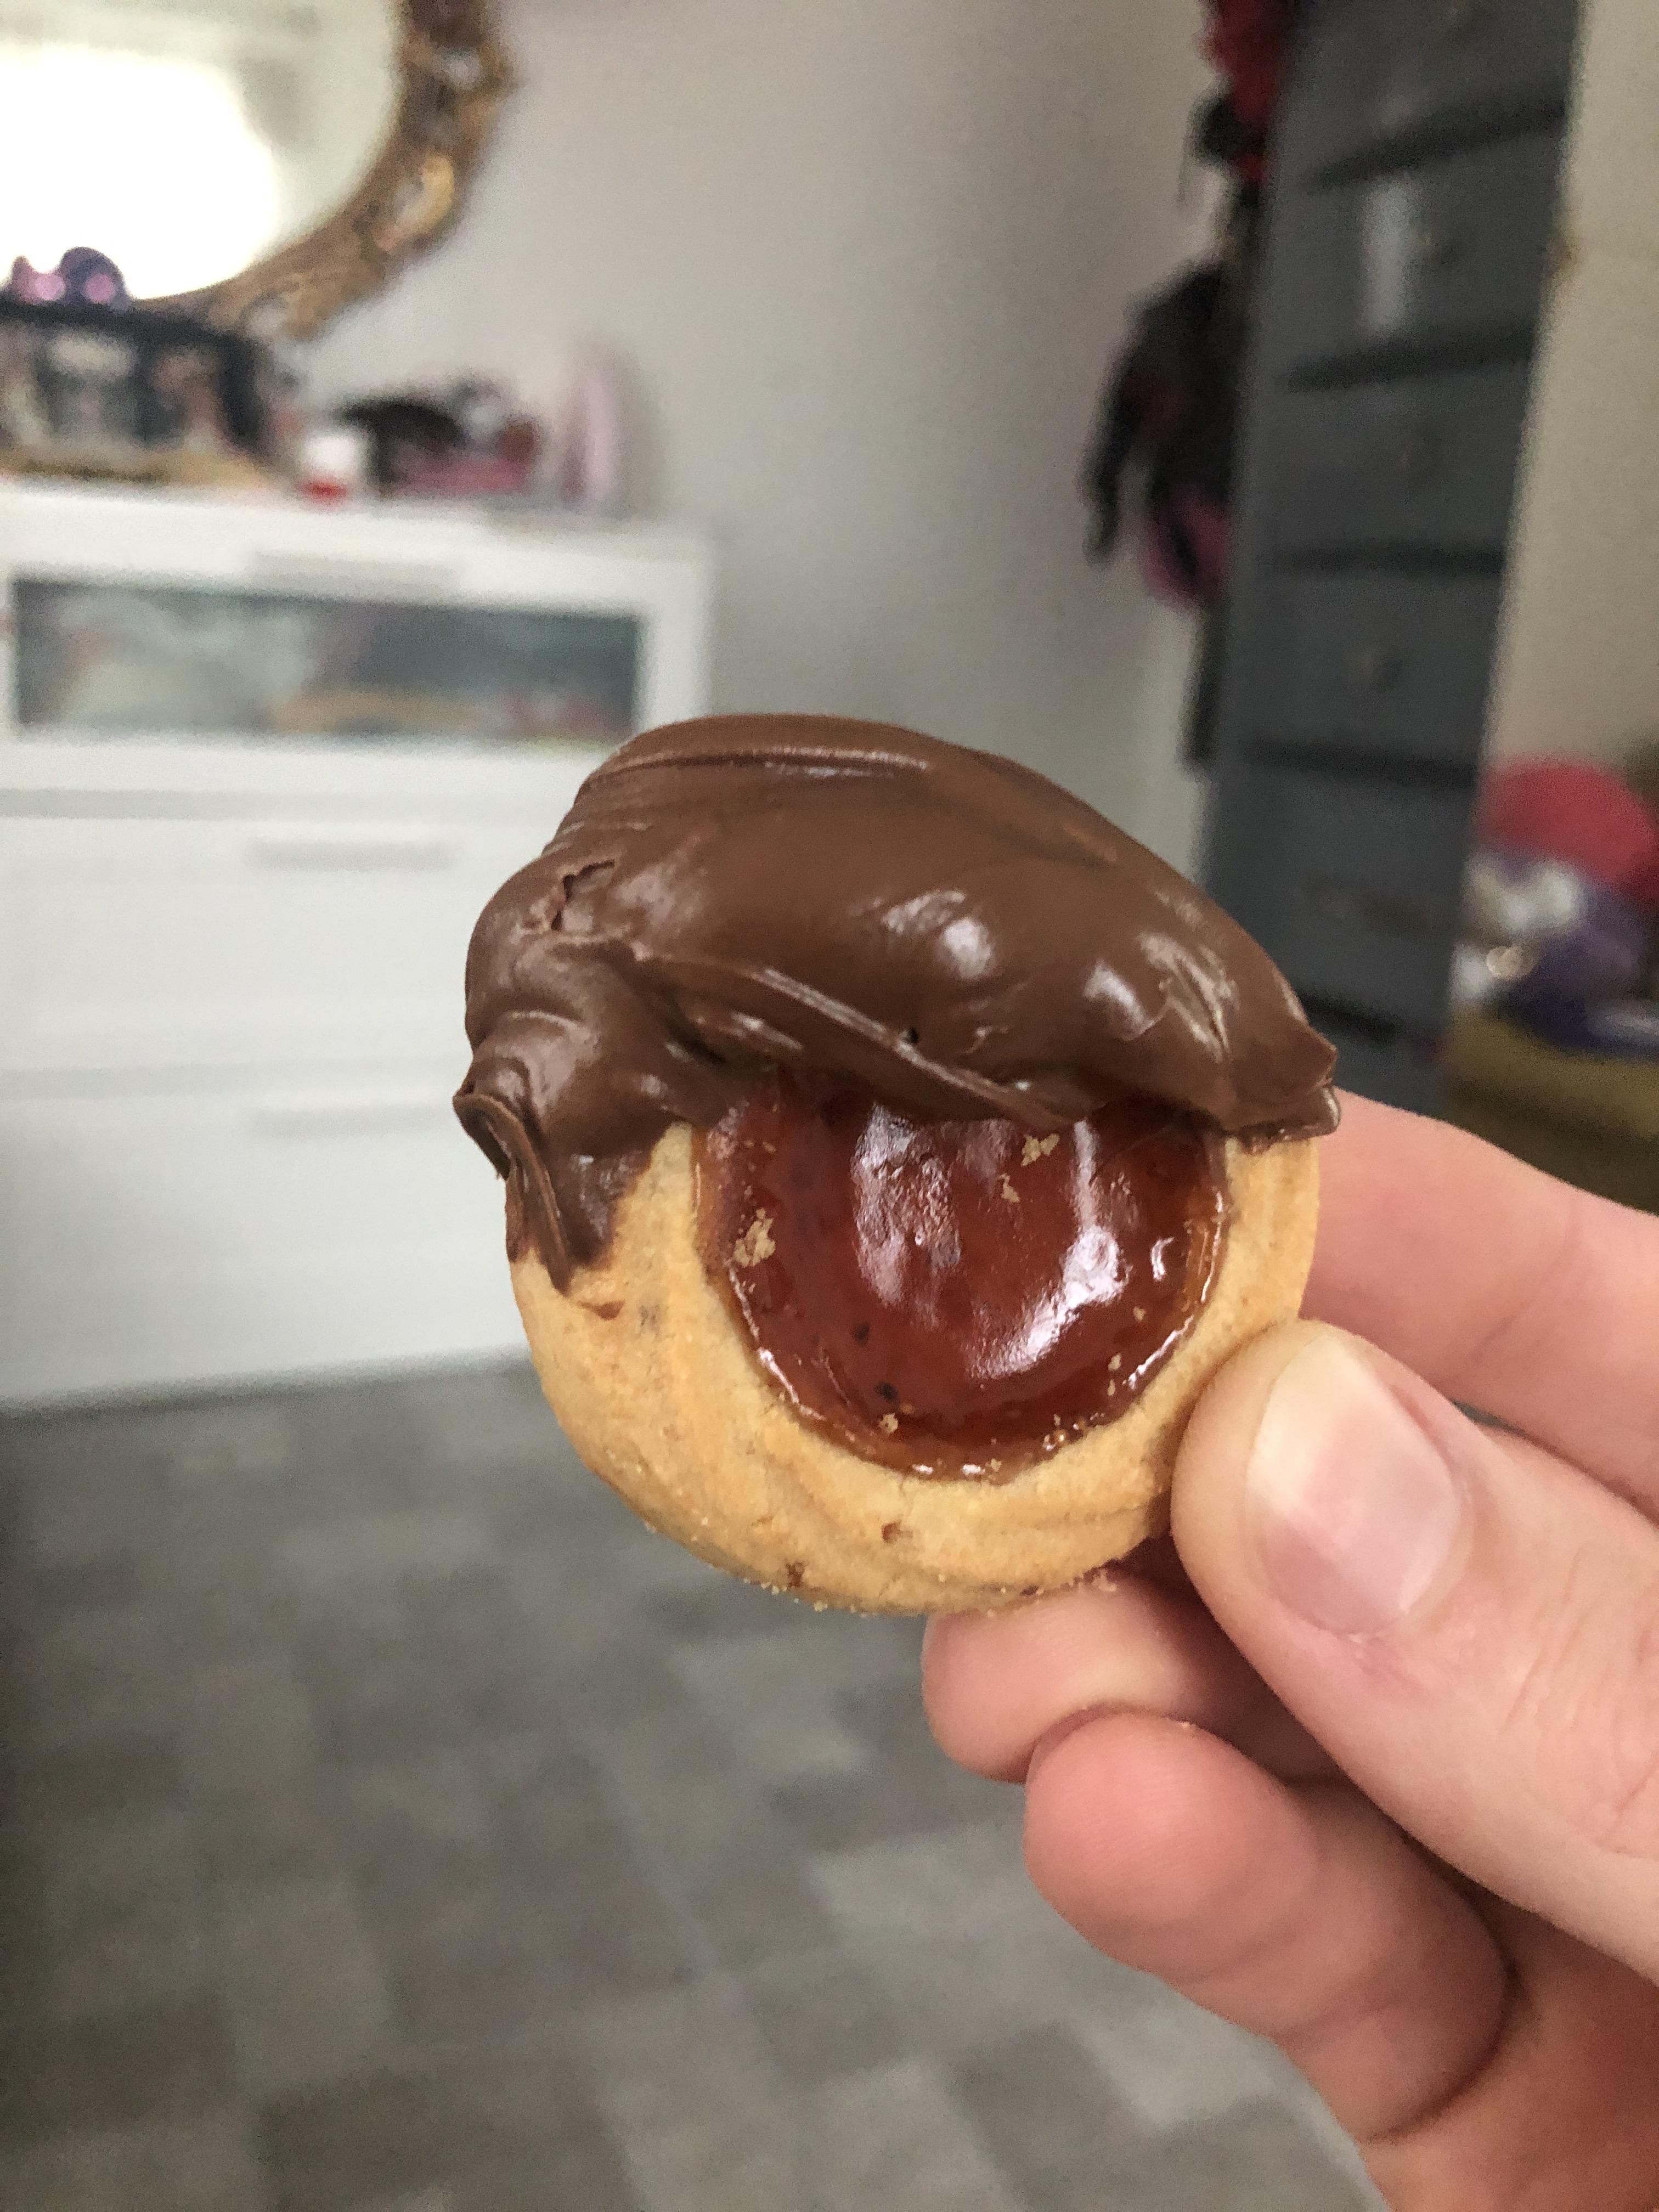 Dipped this cookie in Nutella, accidentally gave it the news anchor haircut.